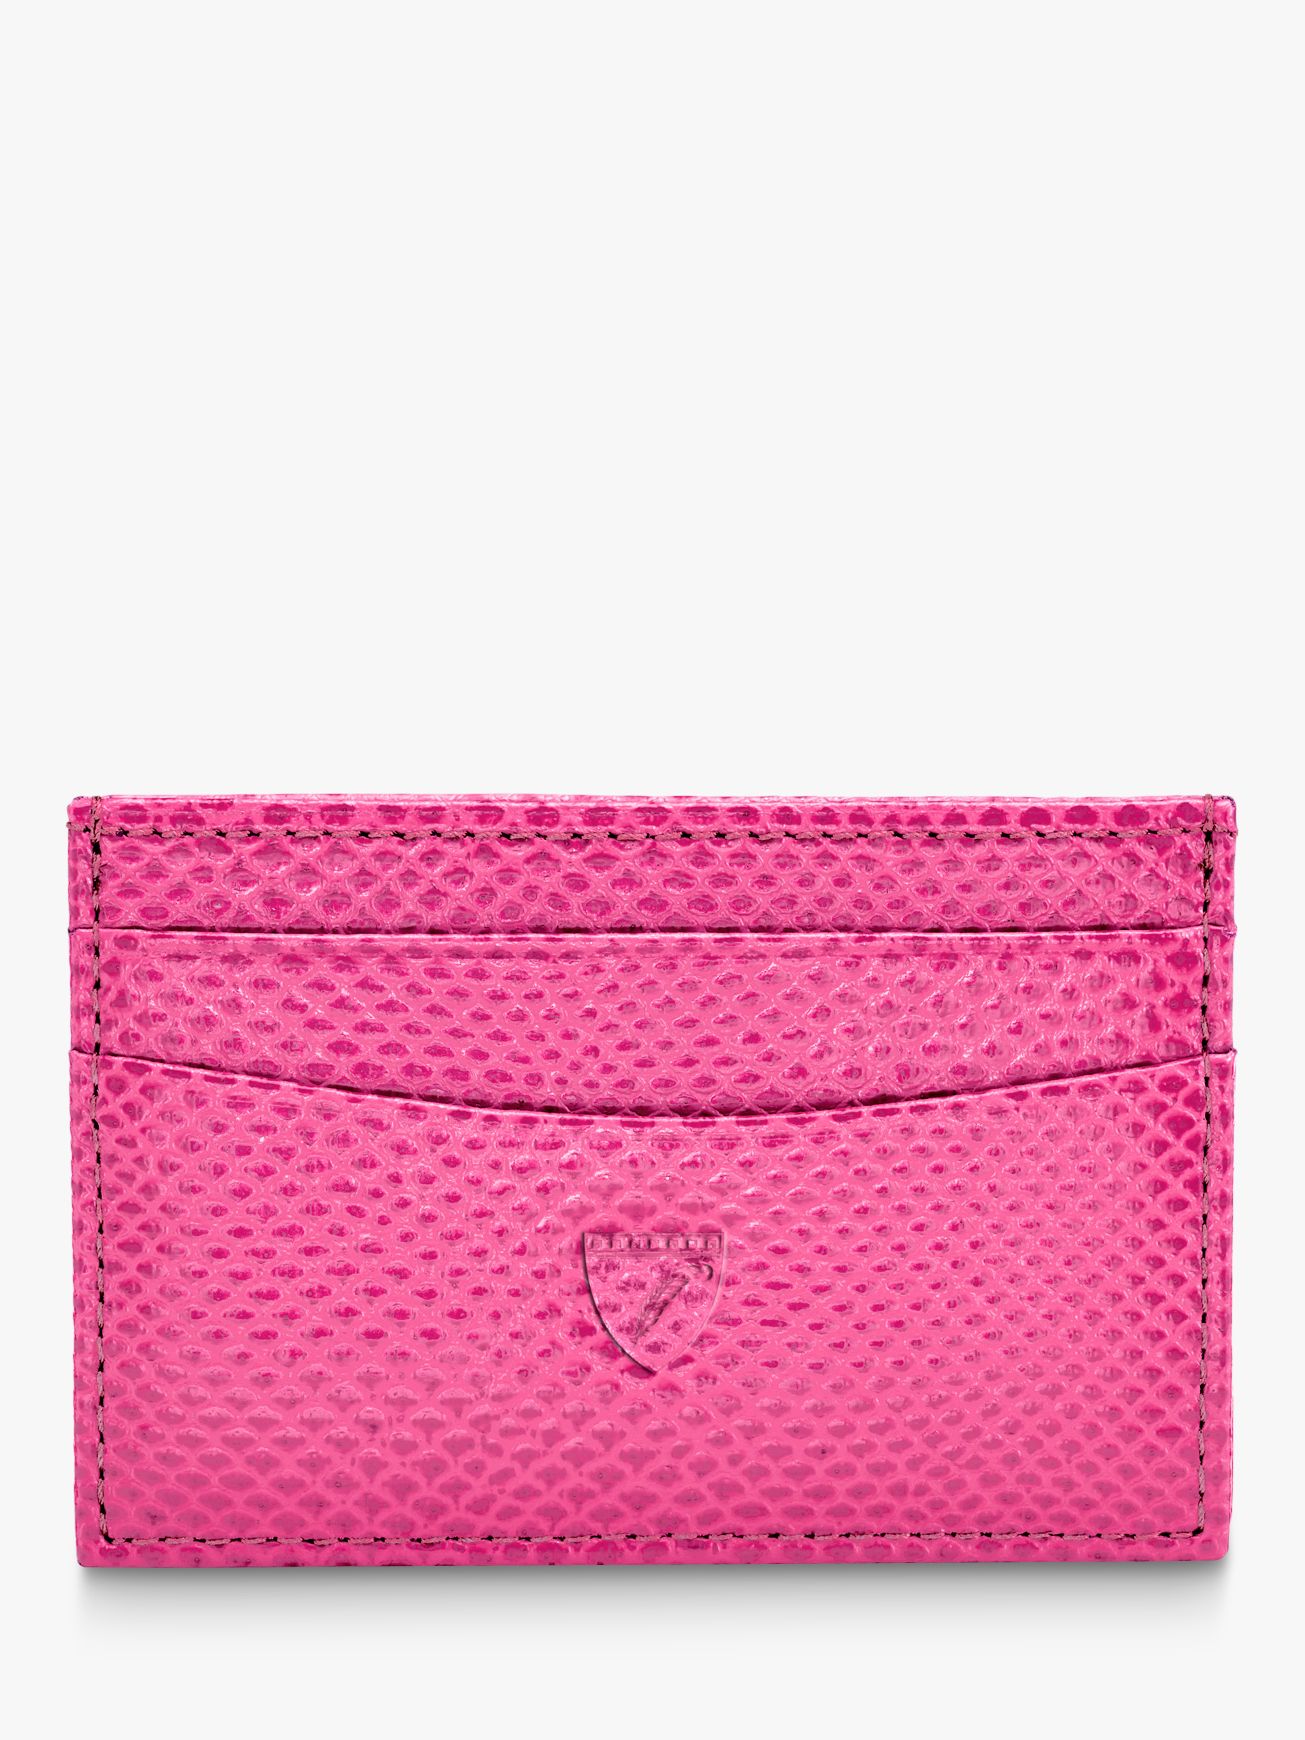 Aspinal of London Leather Slim Credit Card Case, Raspberry